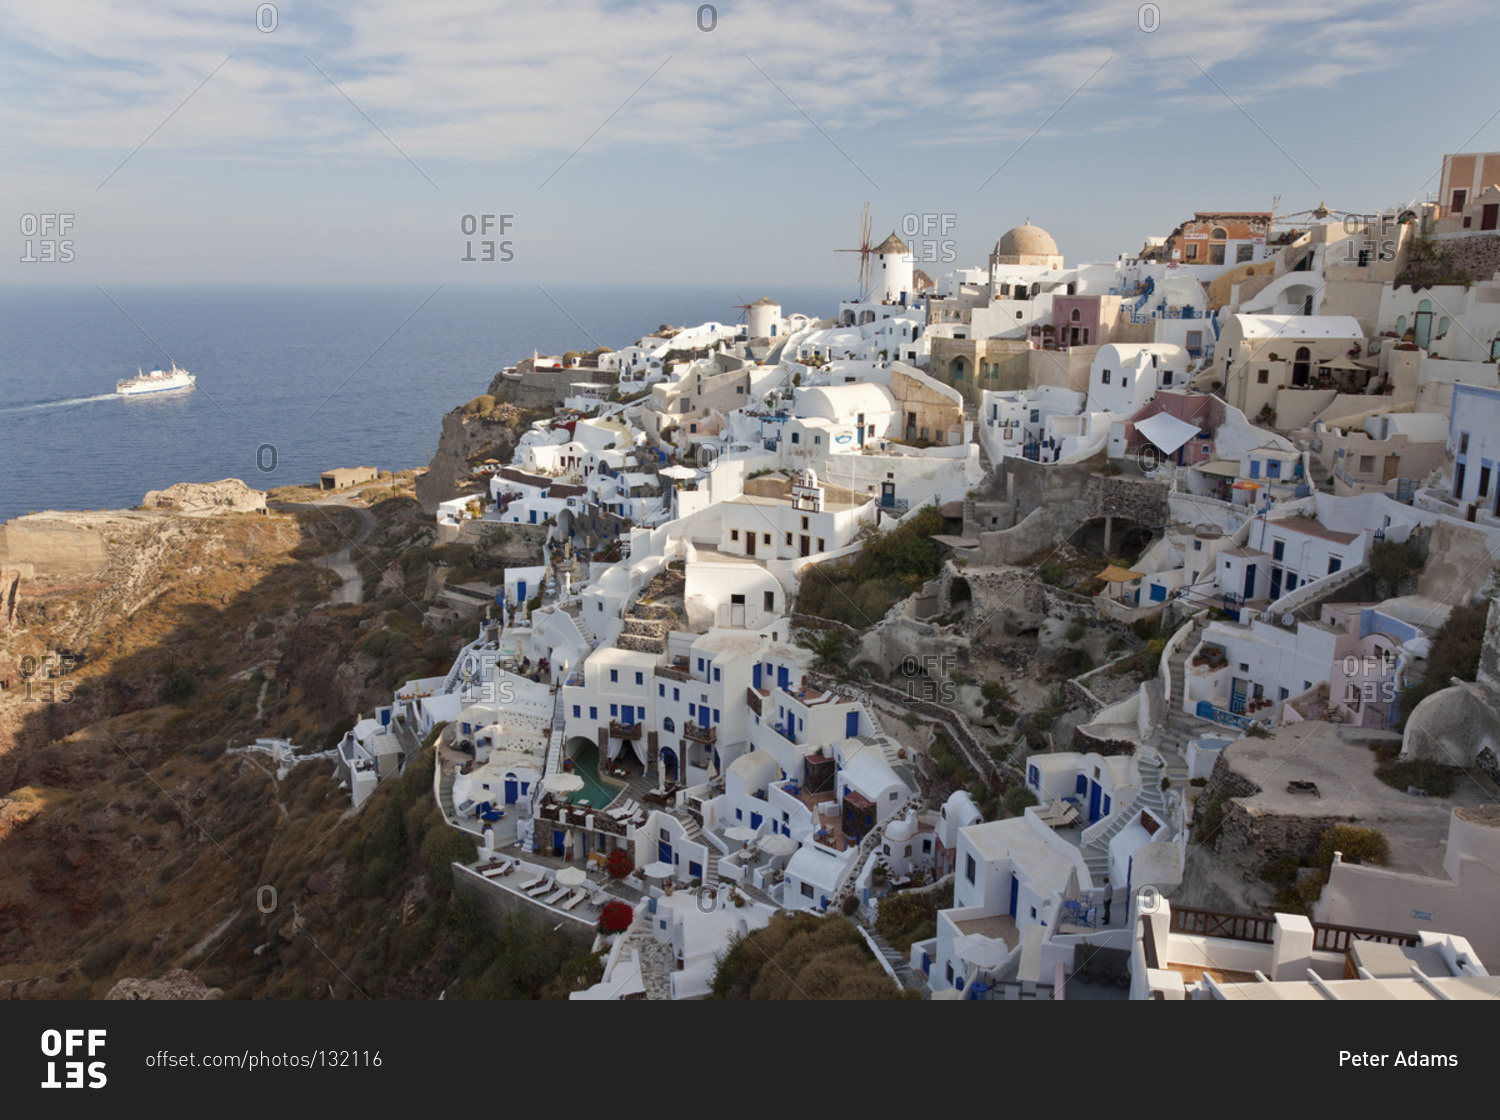 General view of the village of Oia, Santorini, Greece